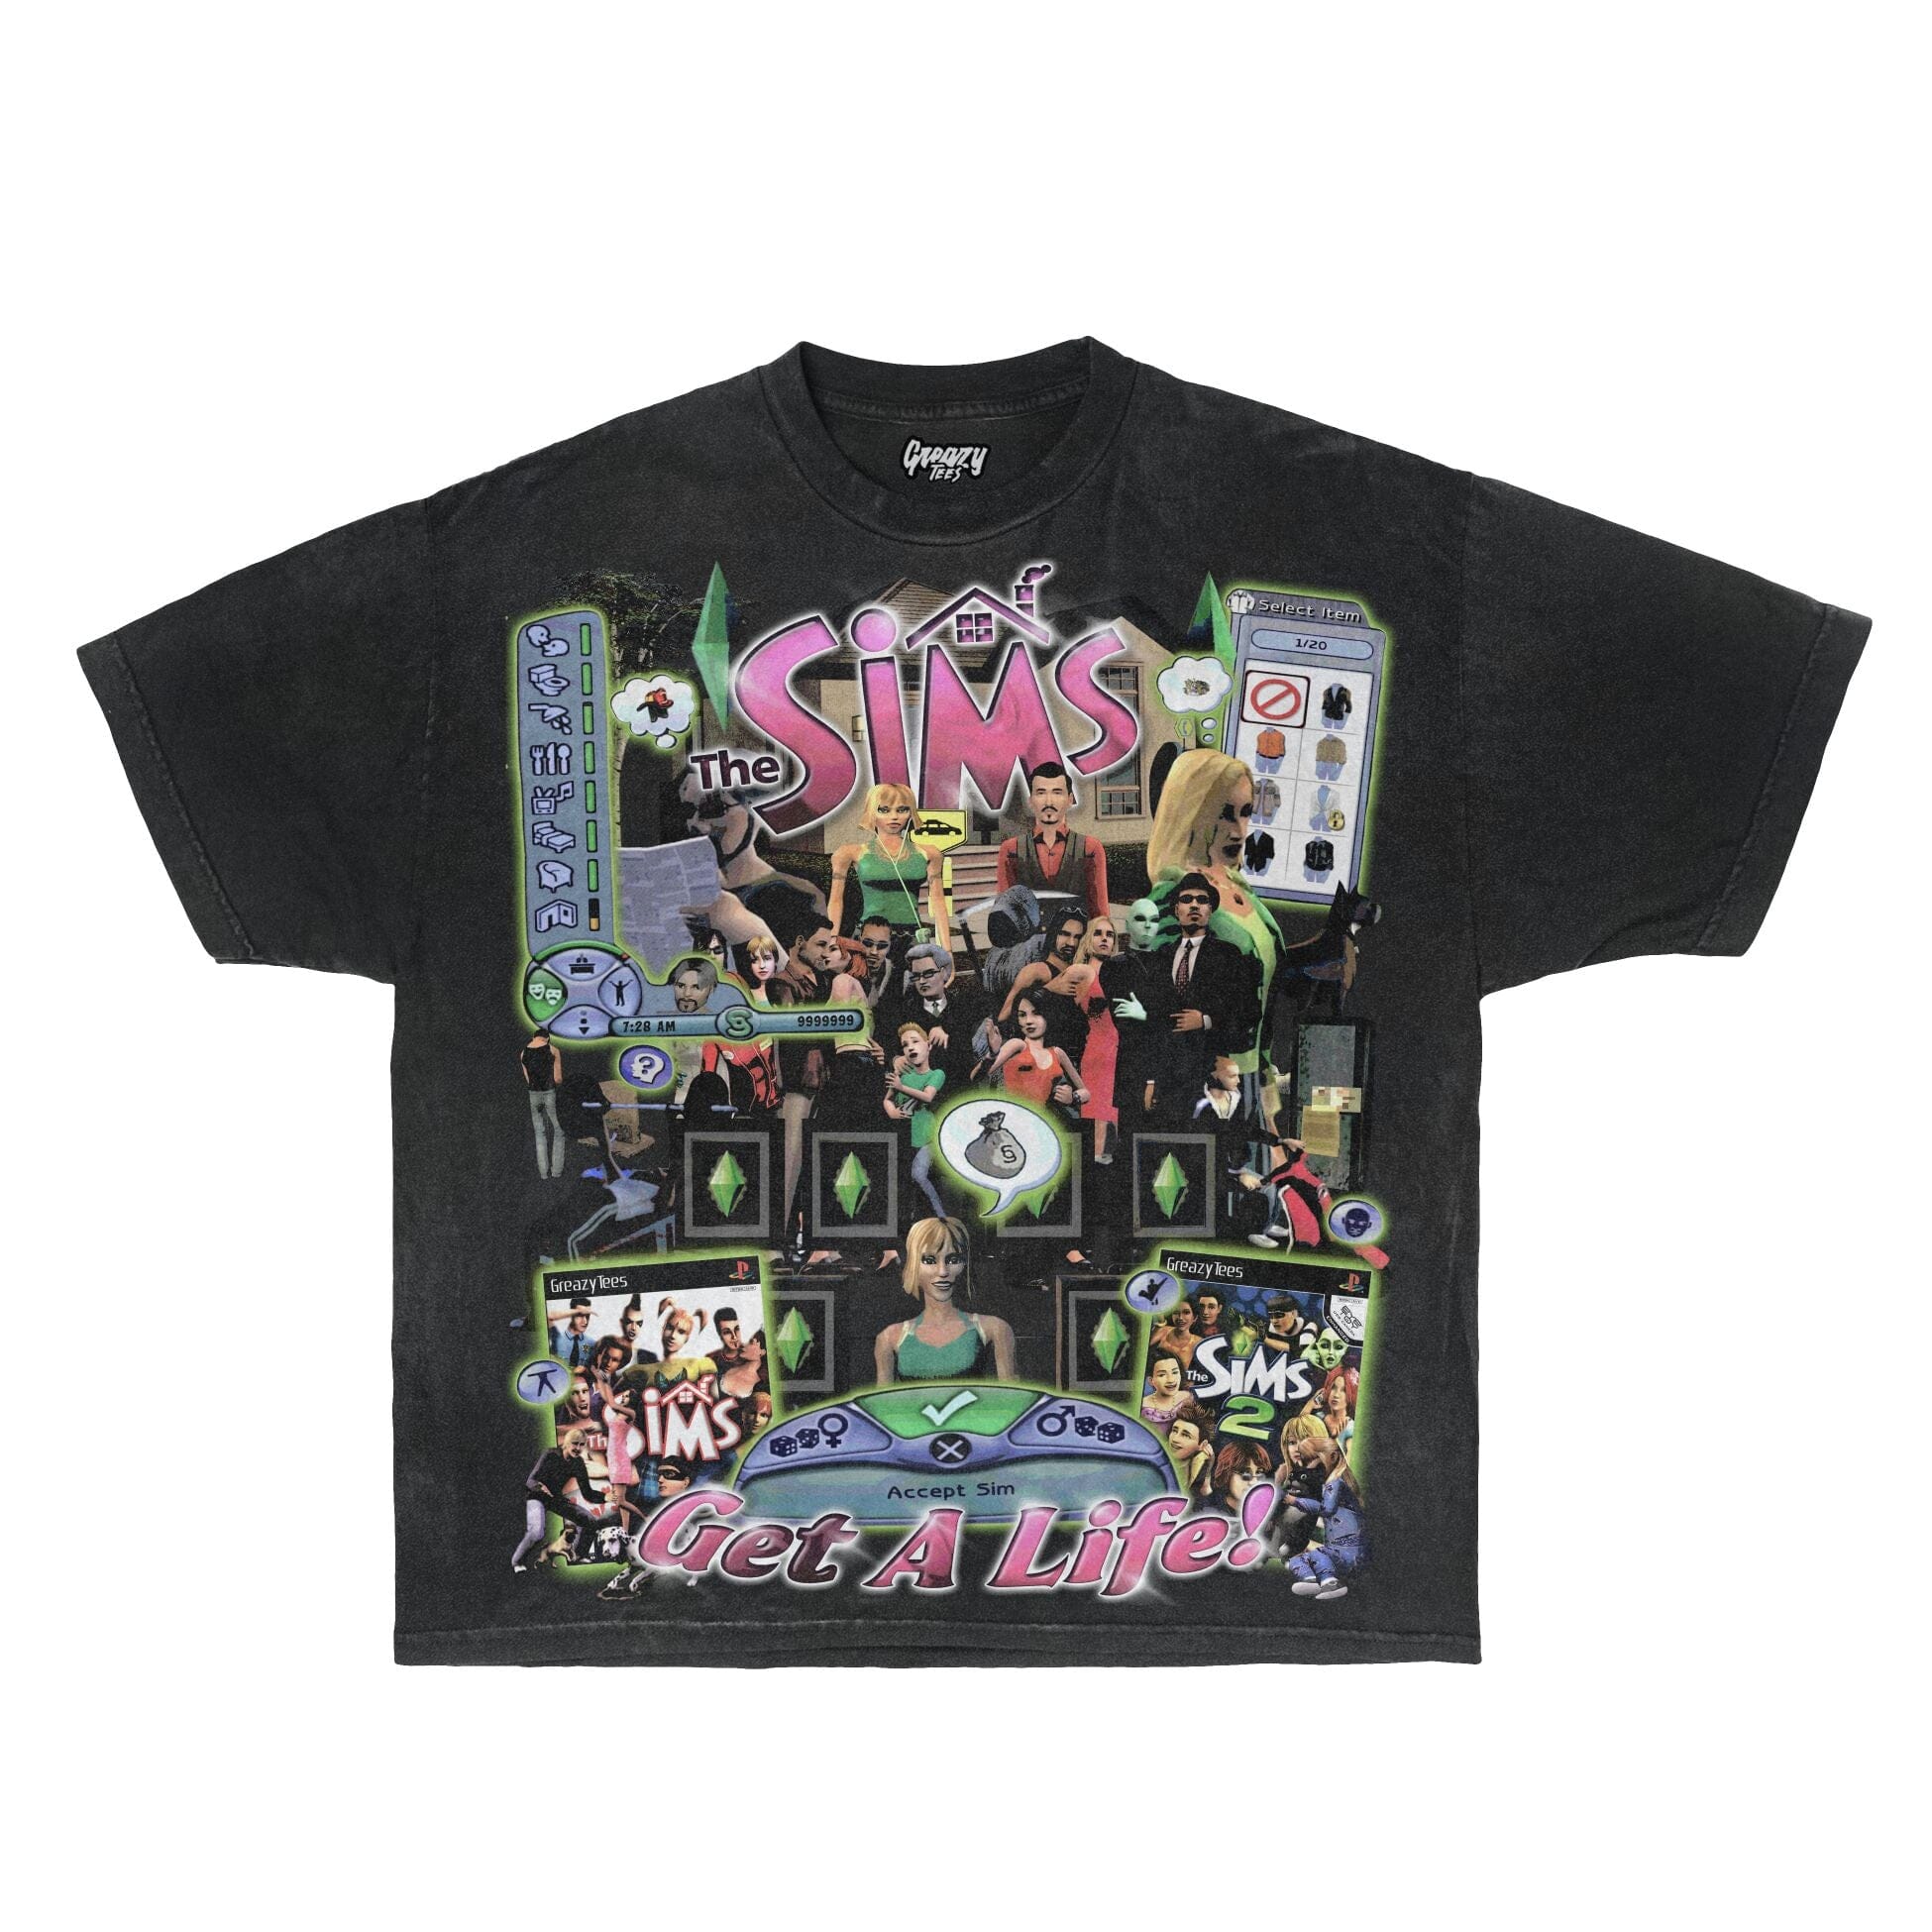 The Sims Tee Tee Greazy Tees XS Black Oversized